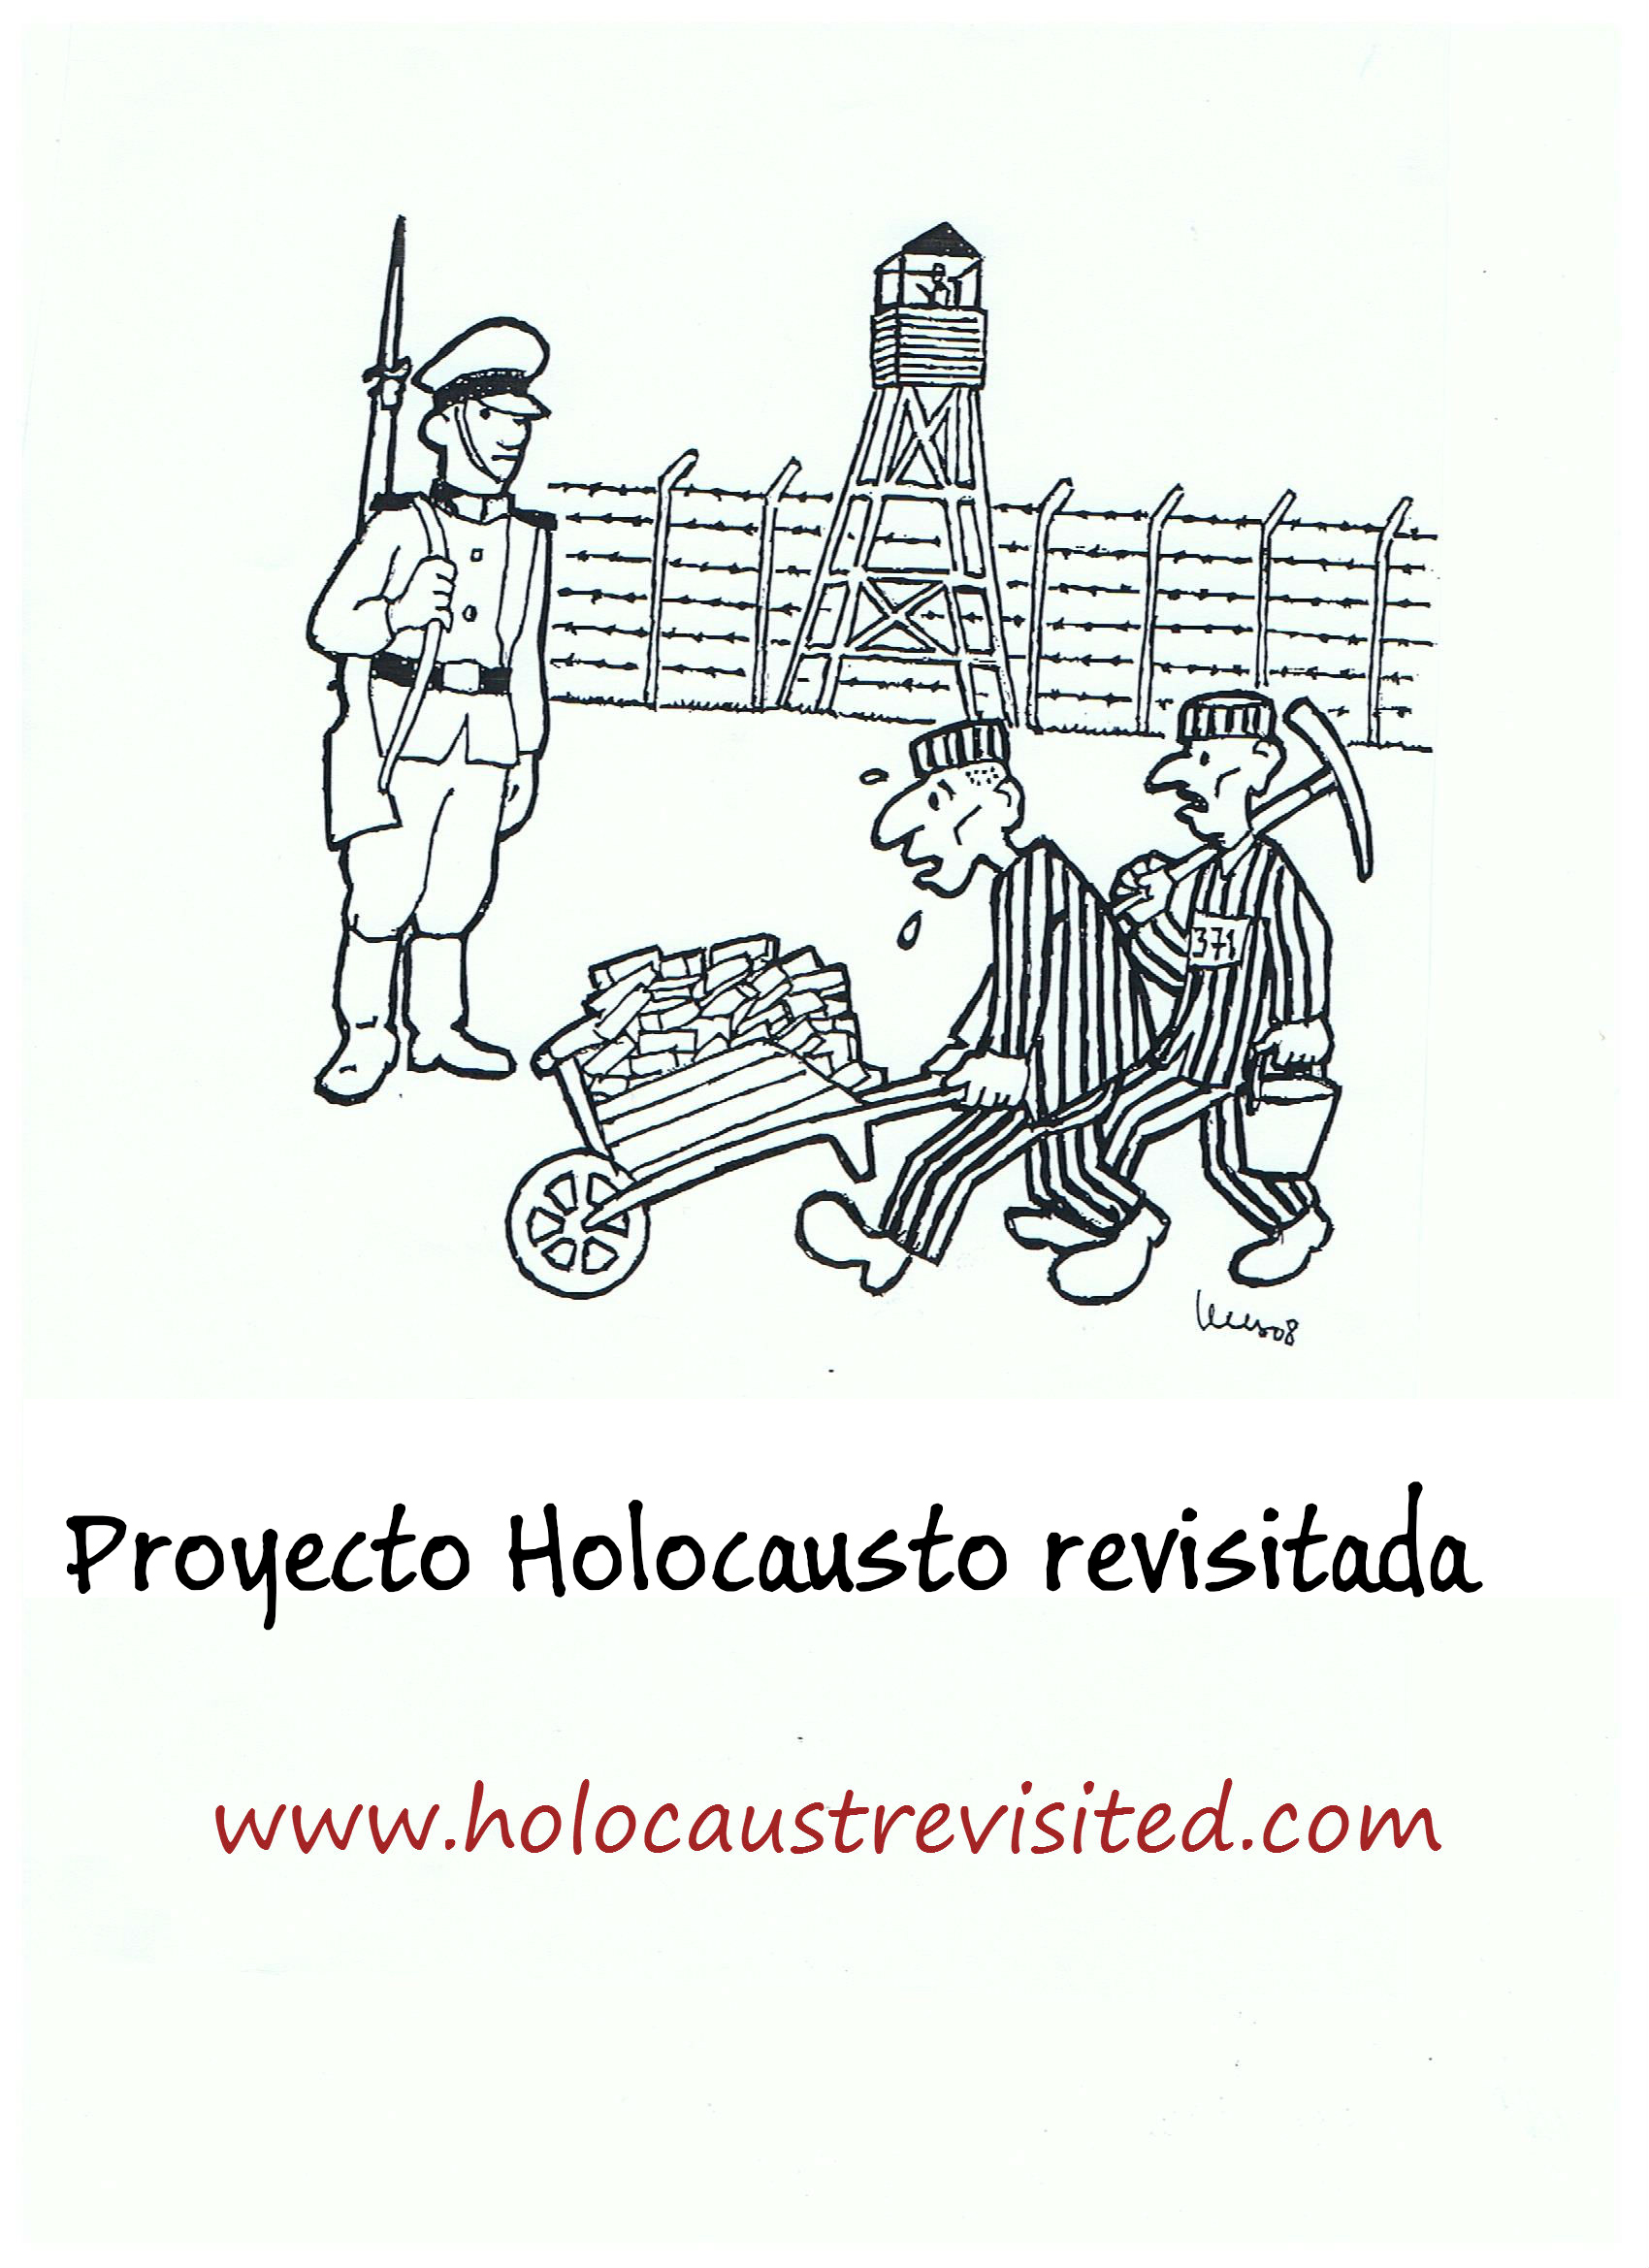 HolocaustRevisited